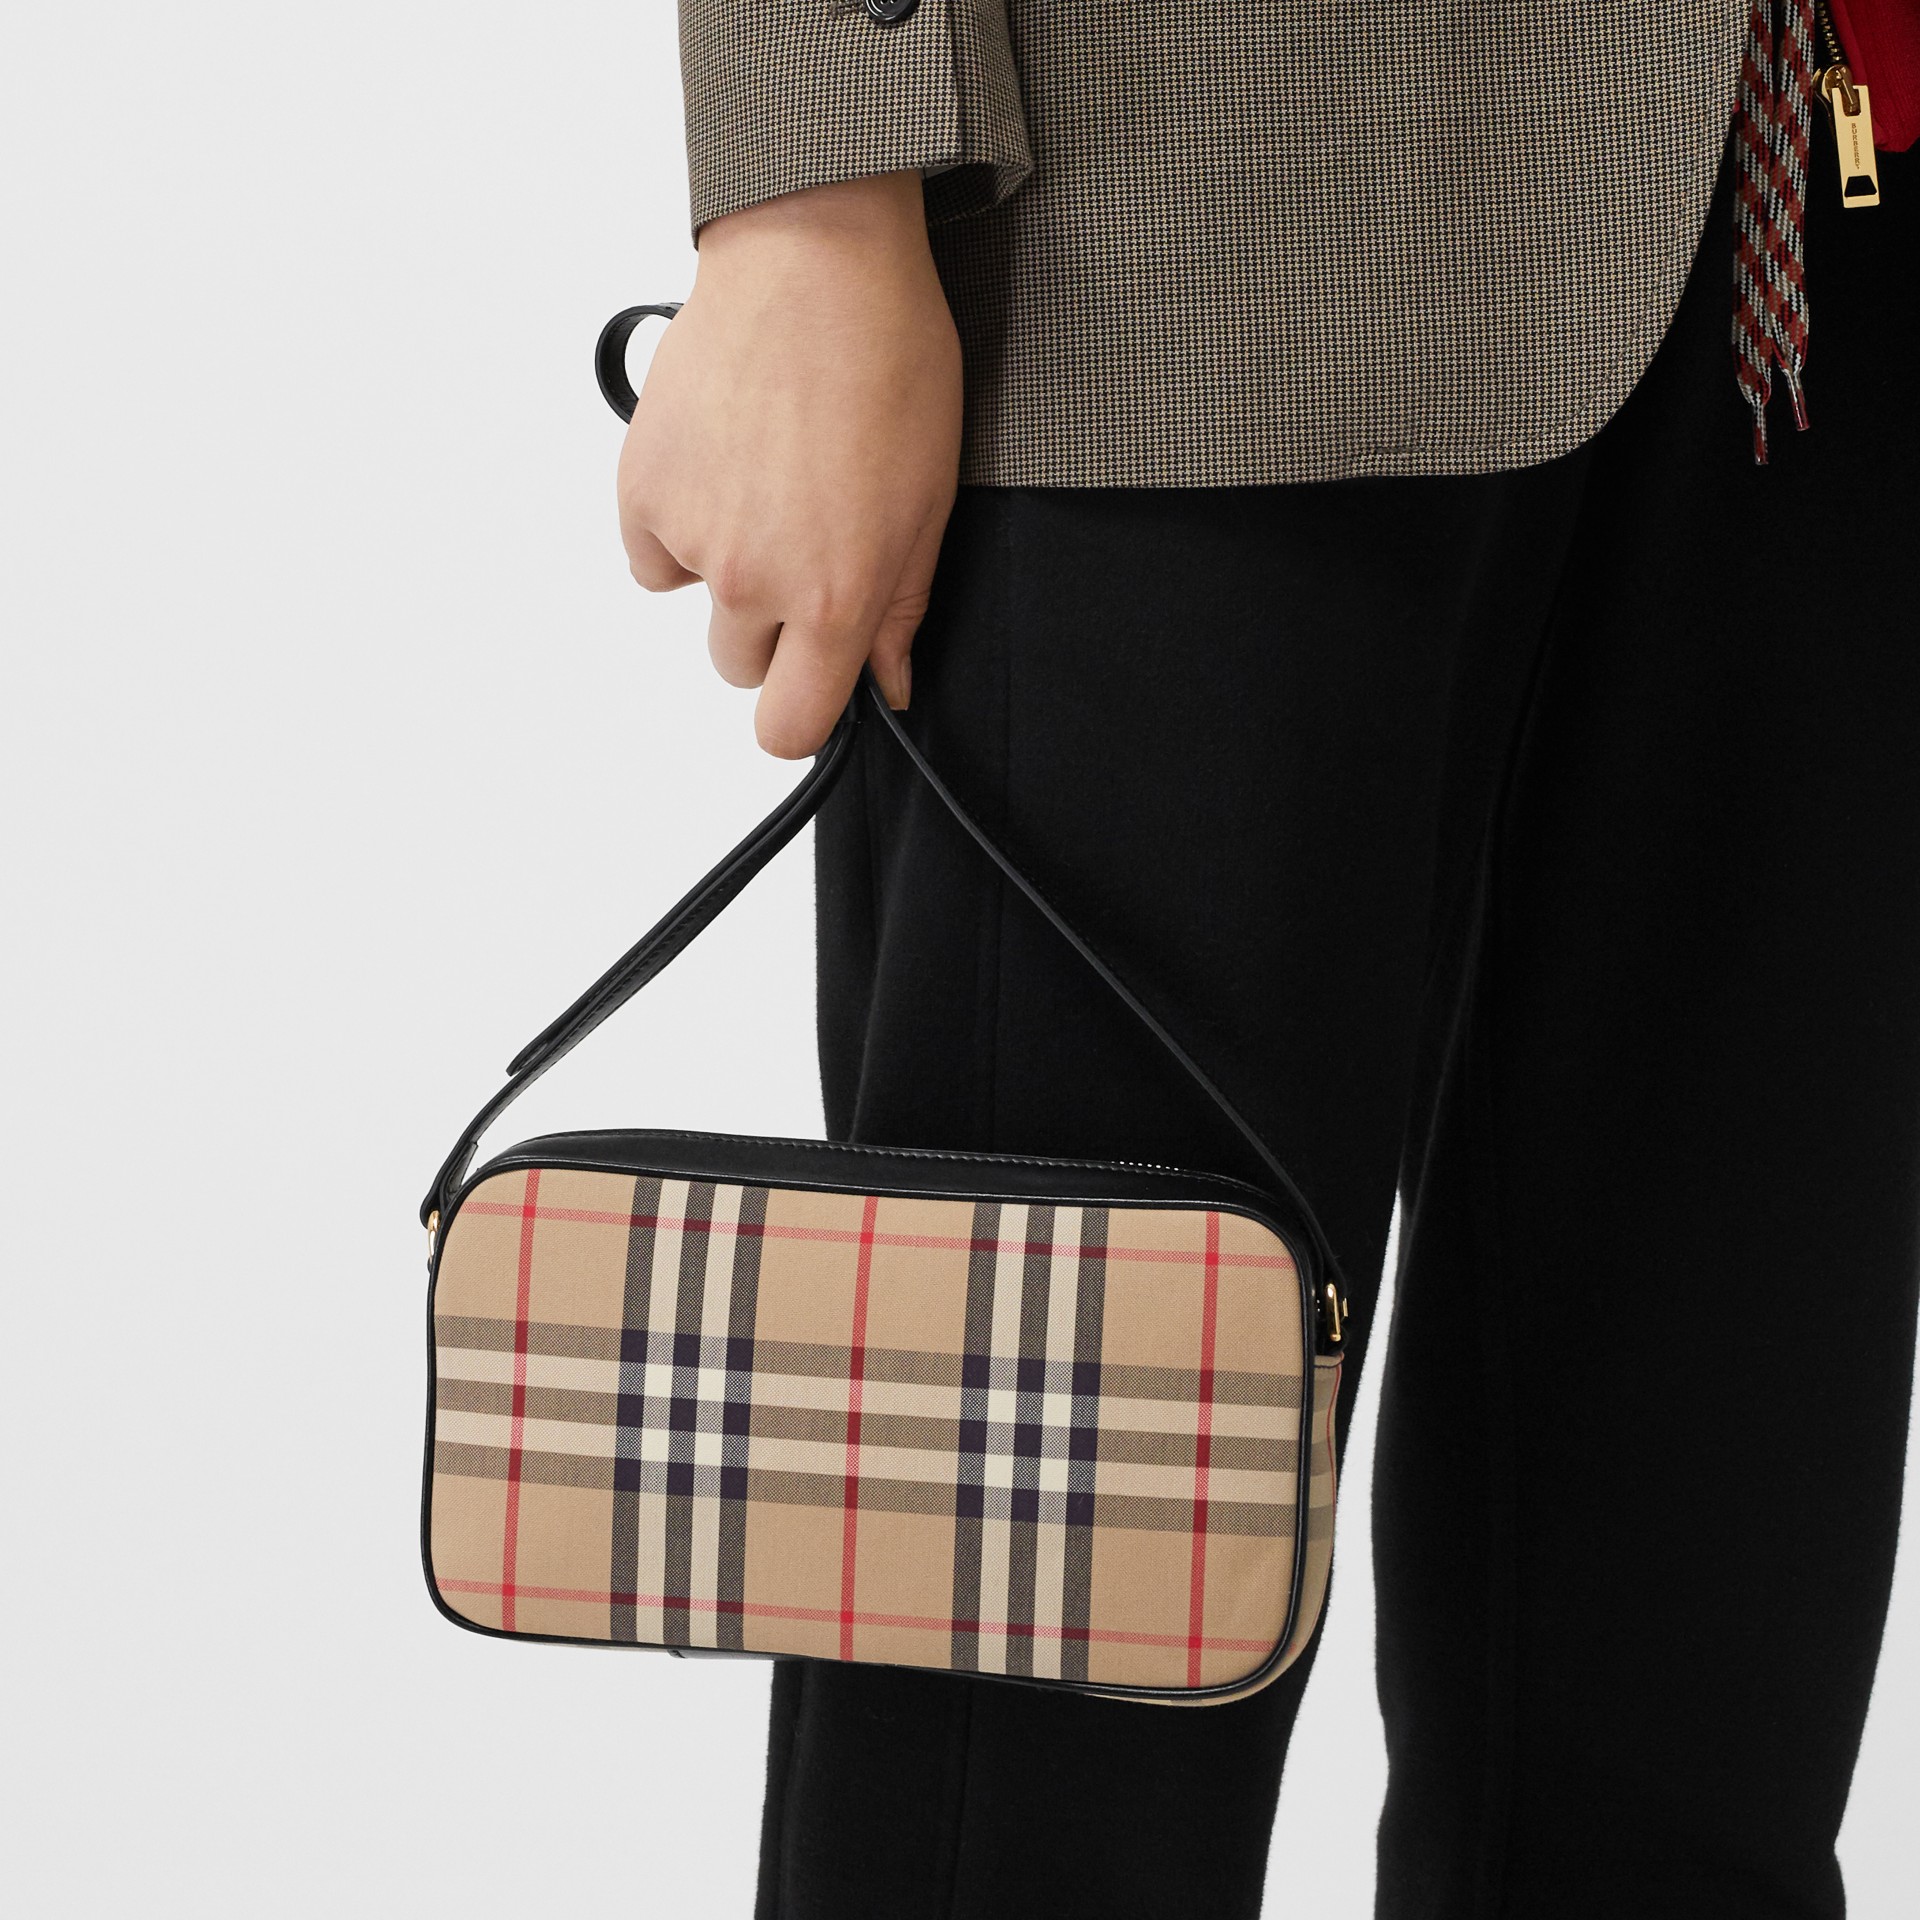 「BURBERRY Small Vintage Check and Leather Camera Bag」的圖片搜尋結果"